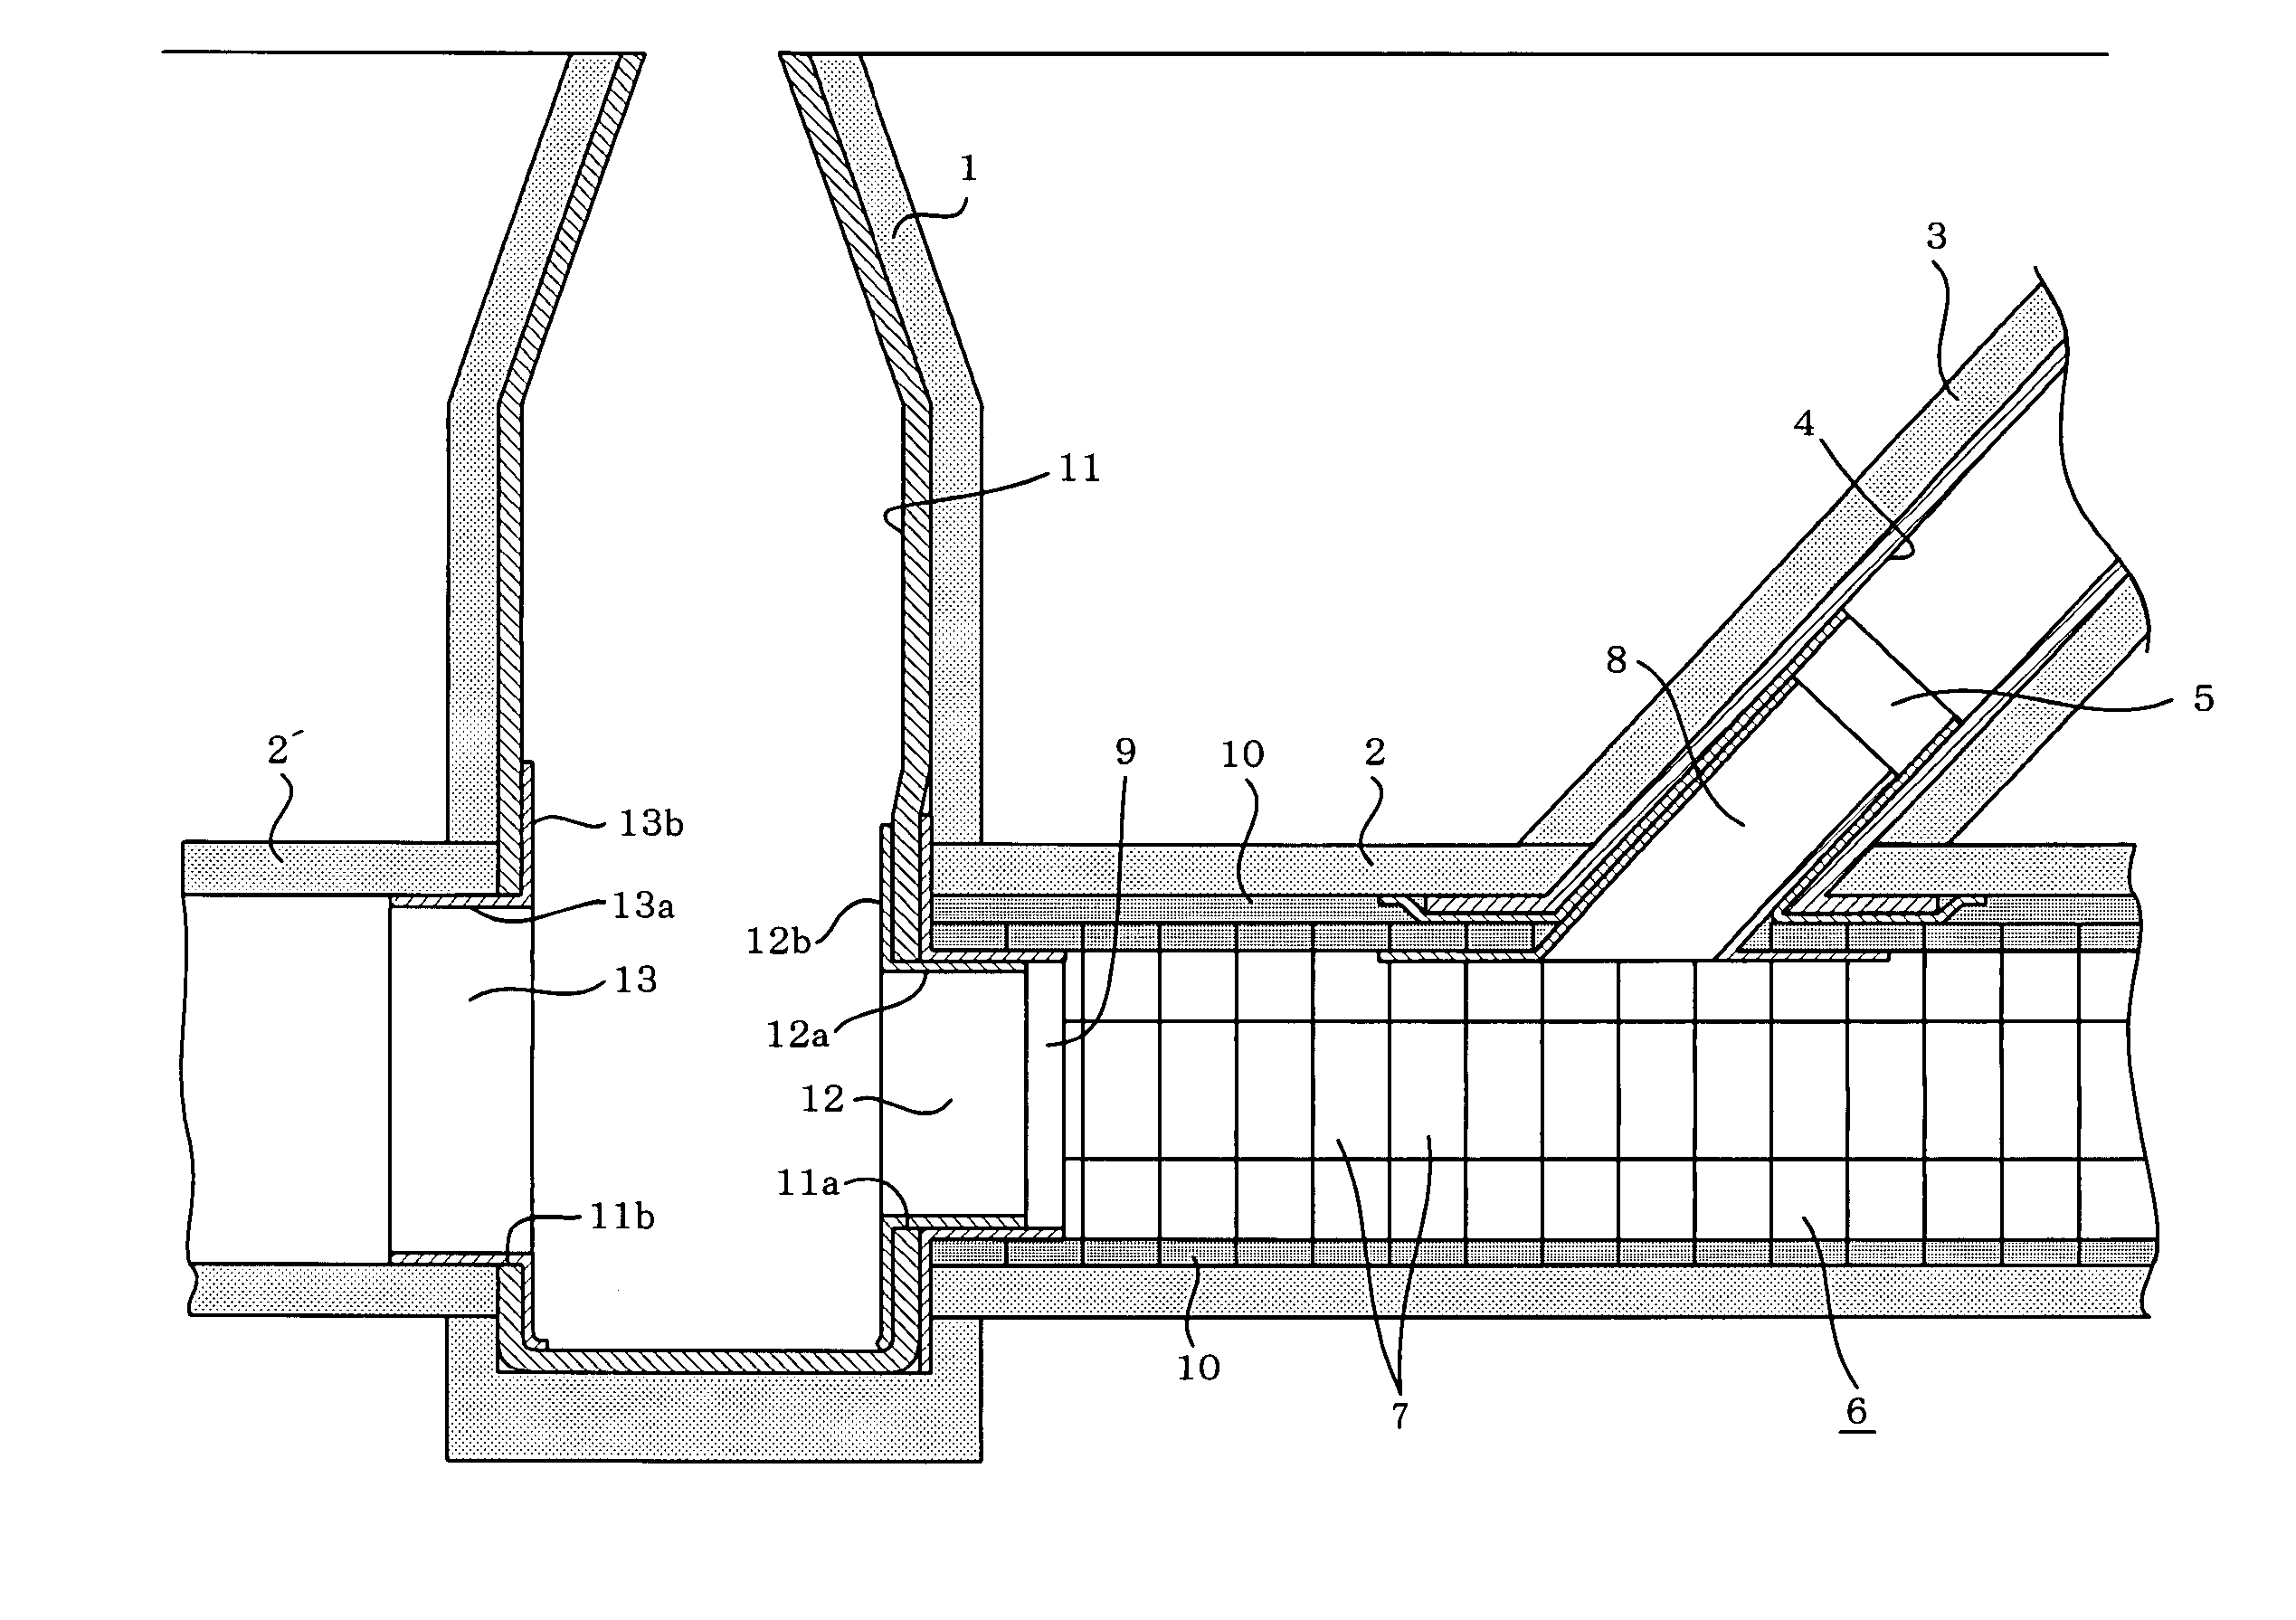 Method for rehabilitating an existing pipe